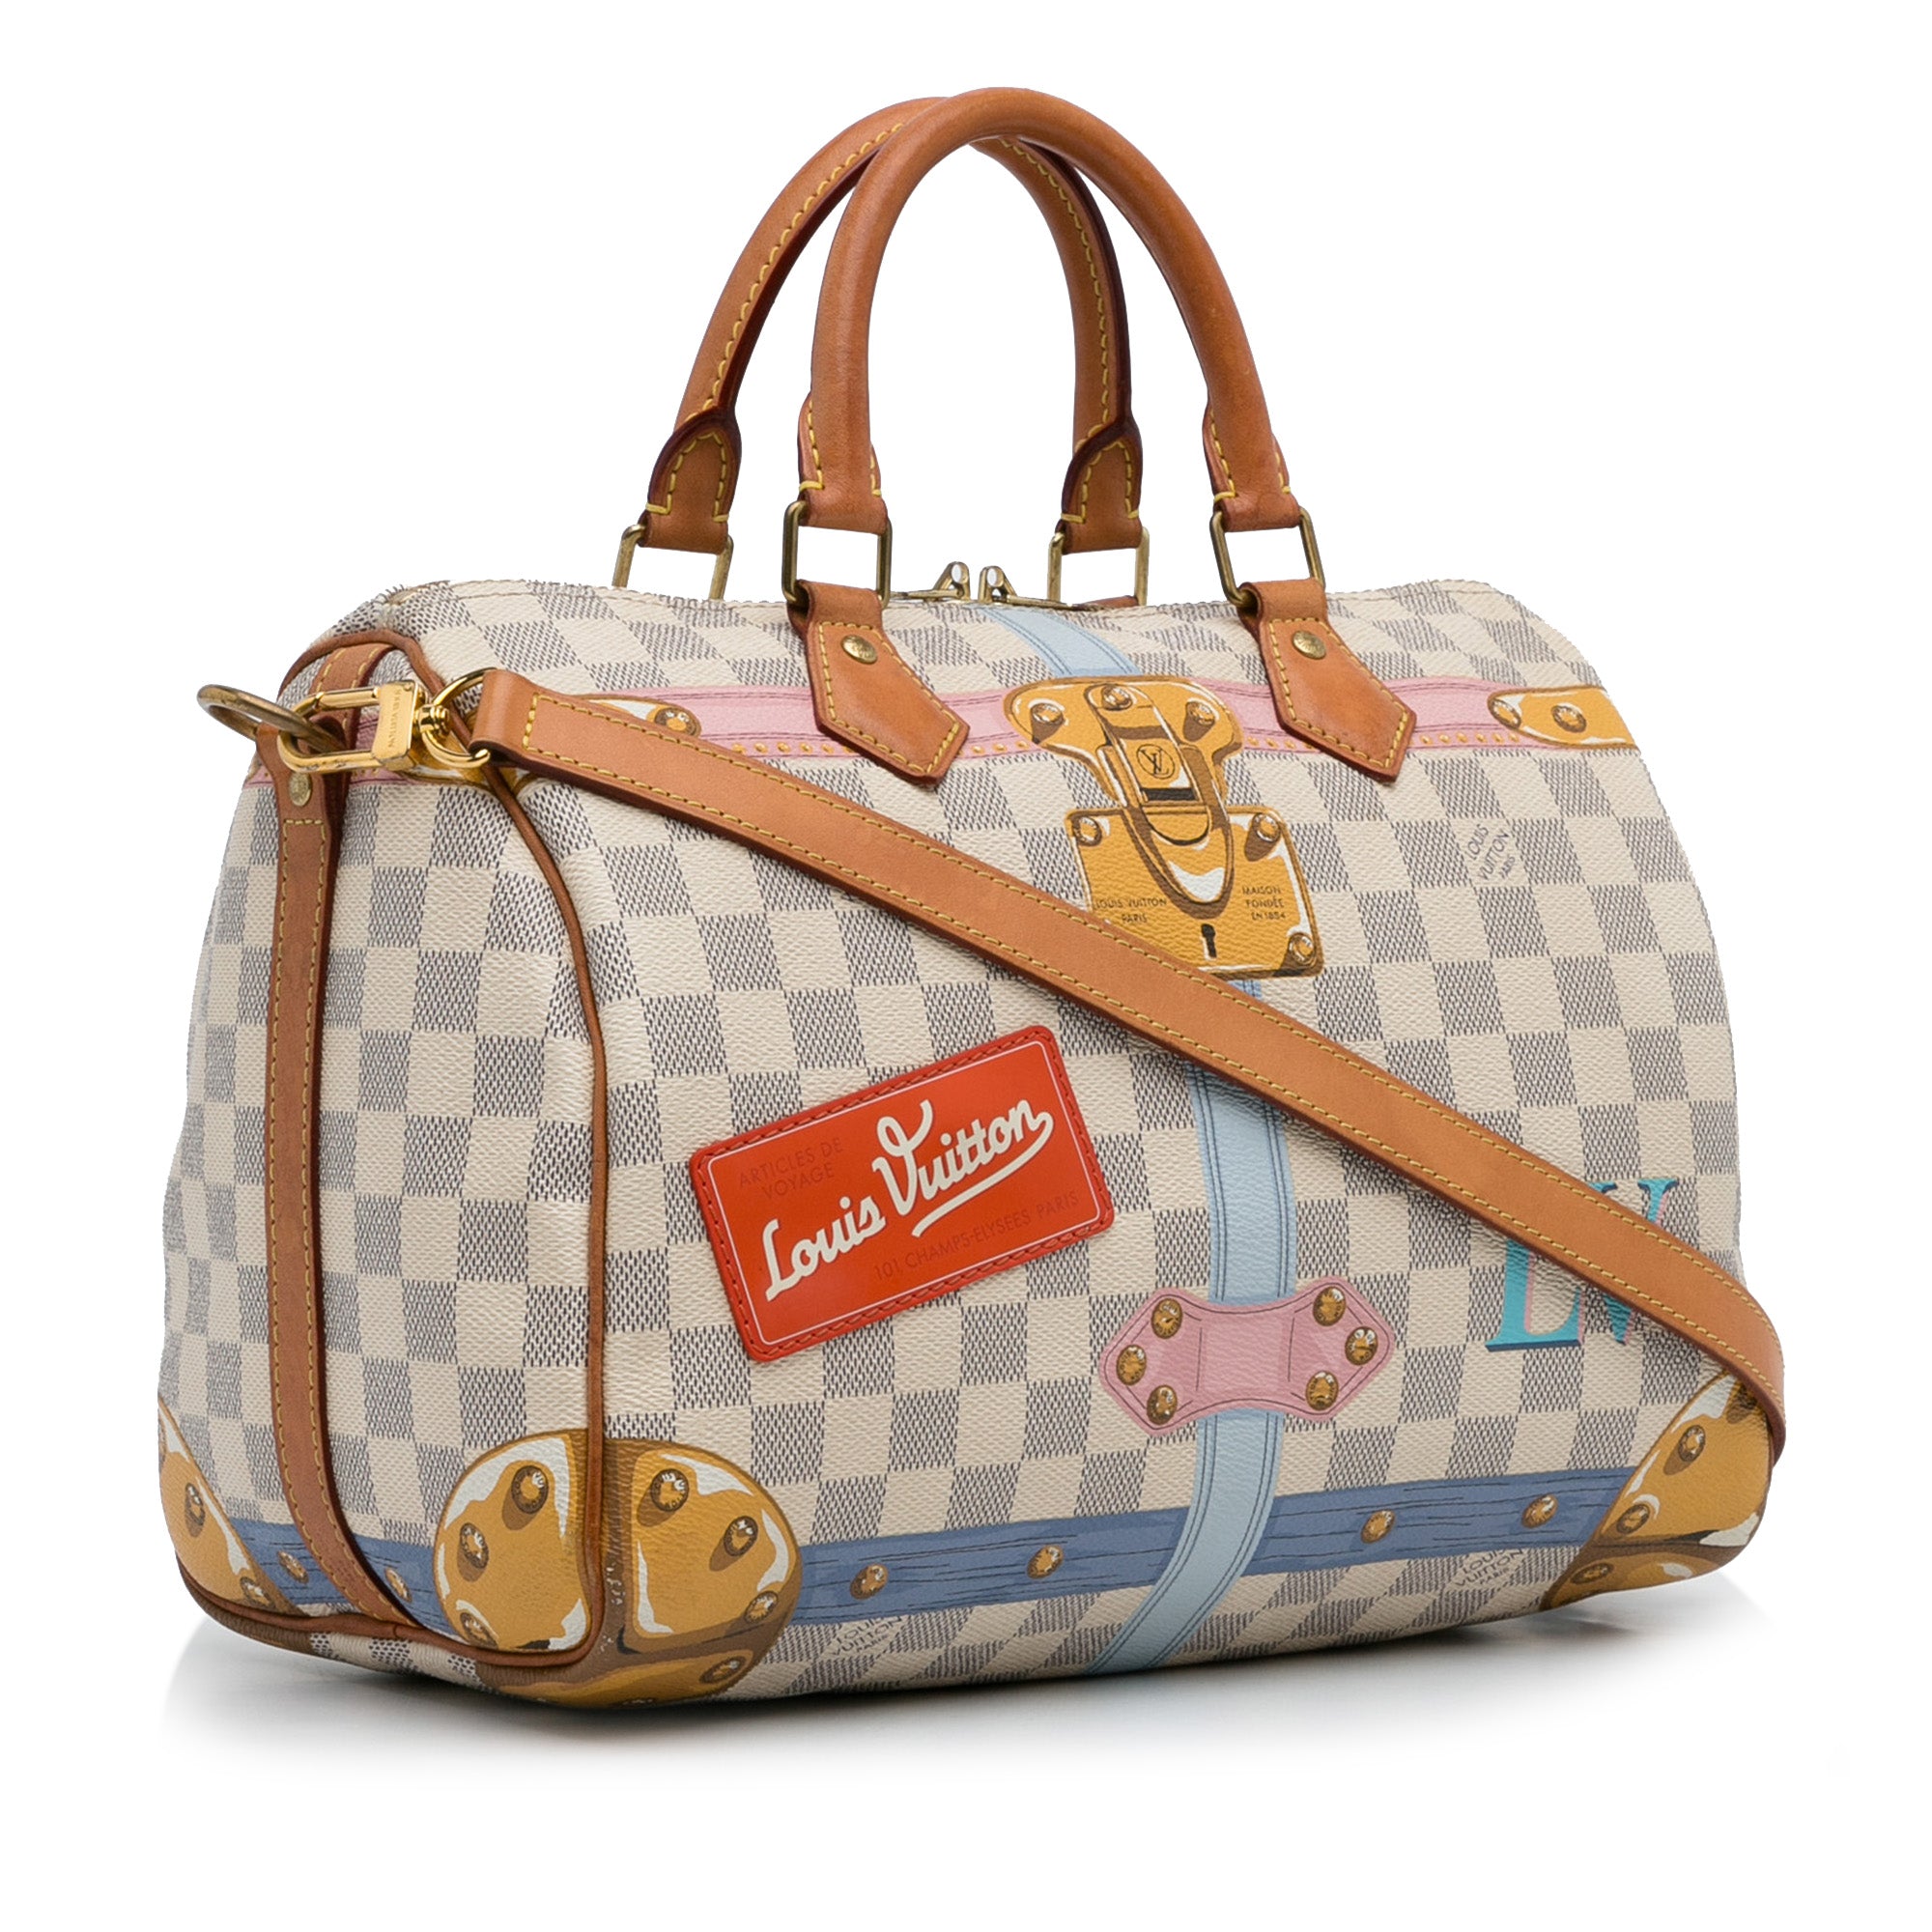 Louis Vuitton Speedy Bandouliere limited edition time trunk